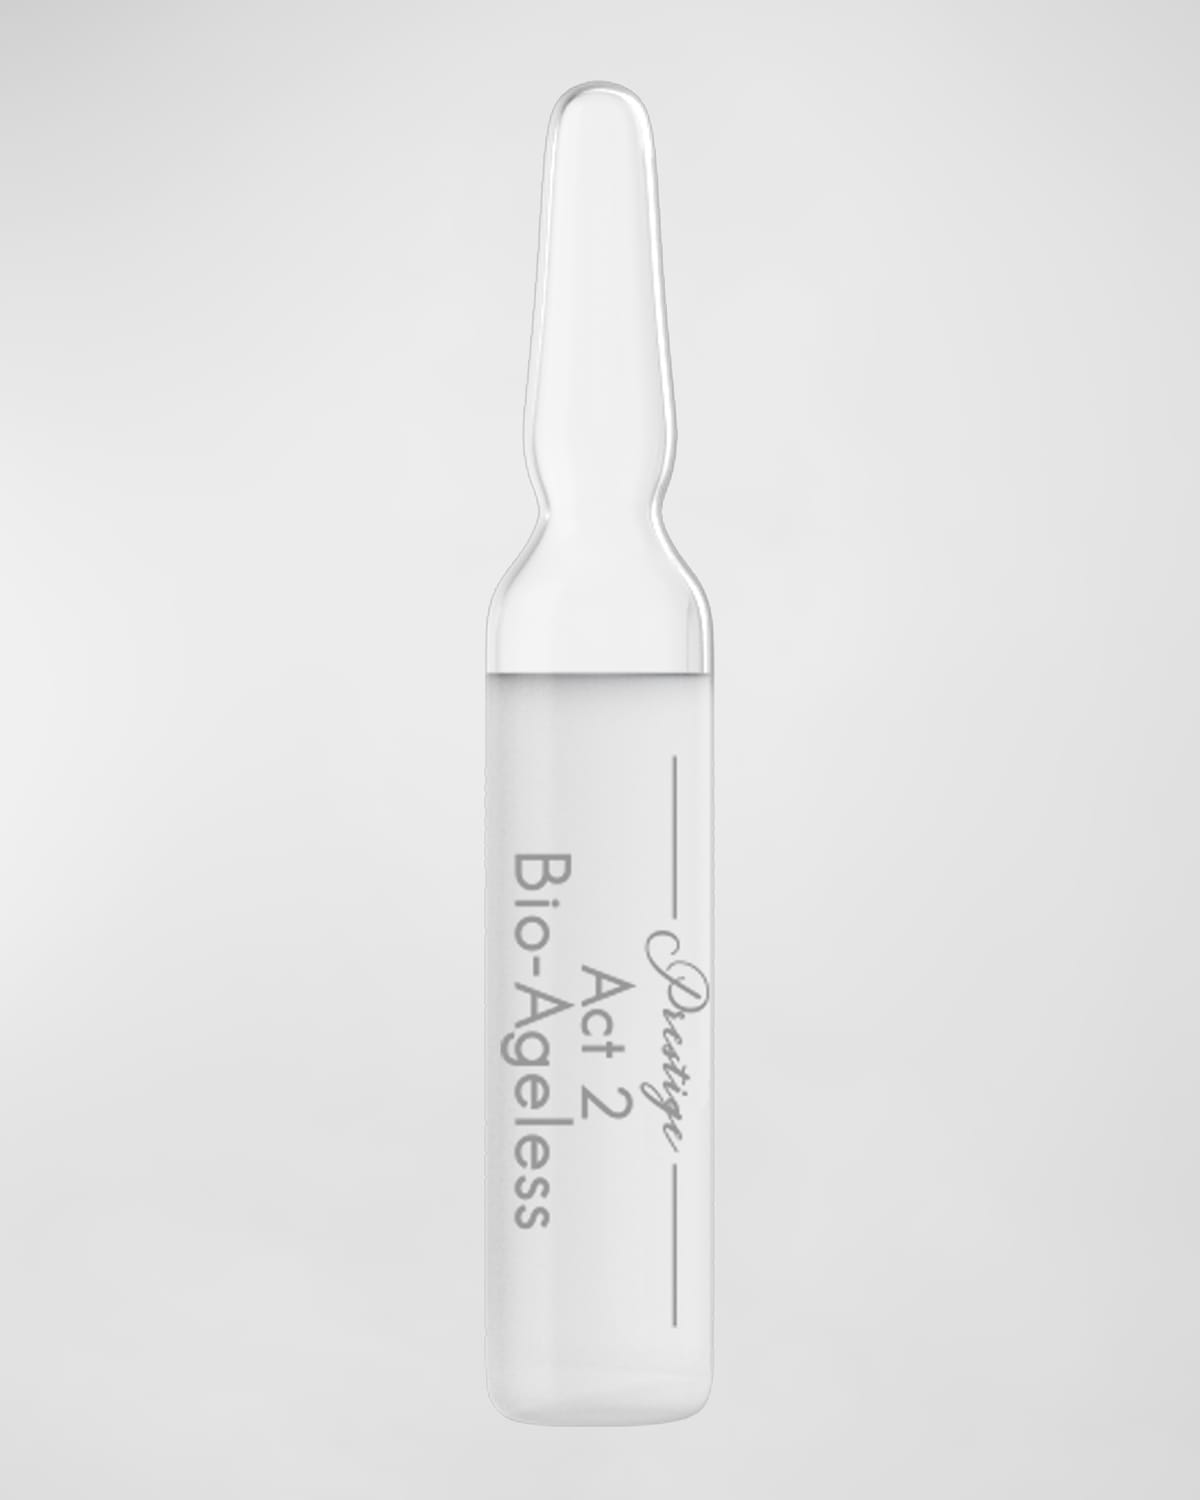 Act Bio Ageless Ampoules